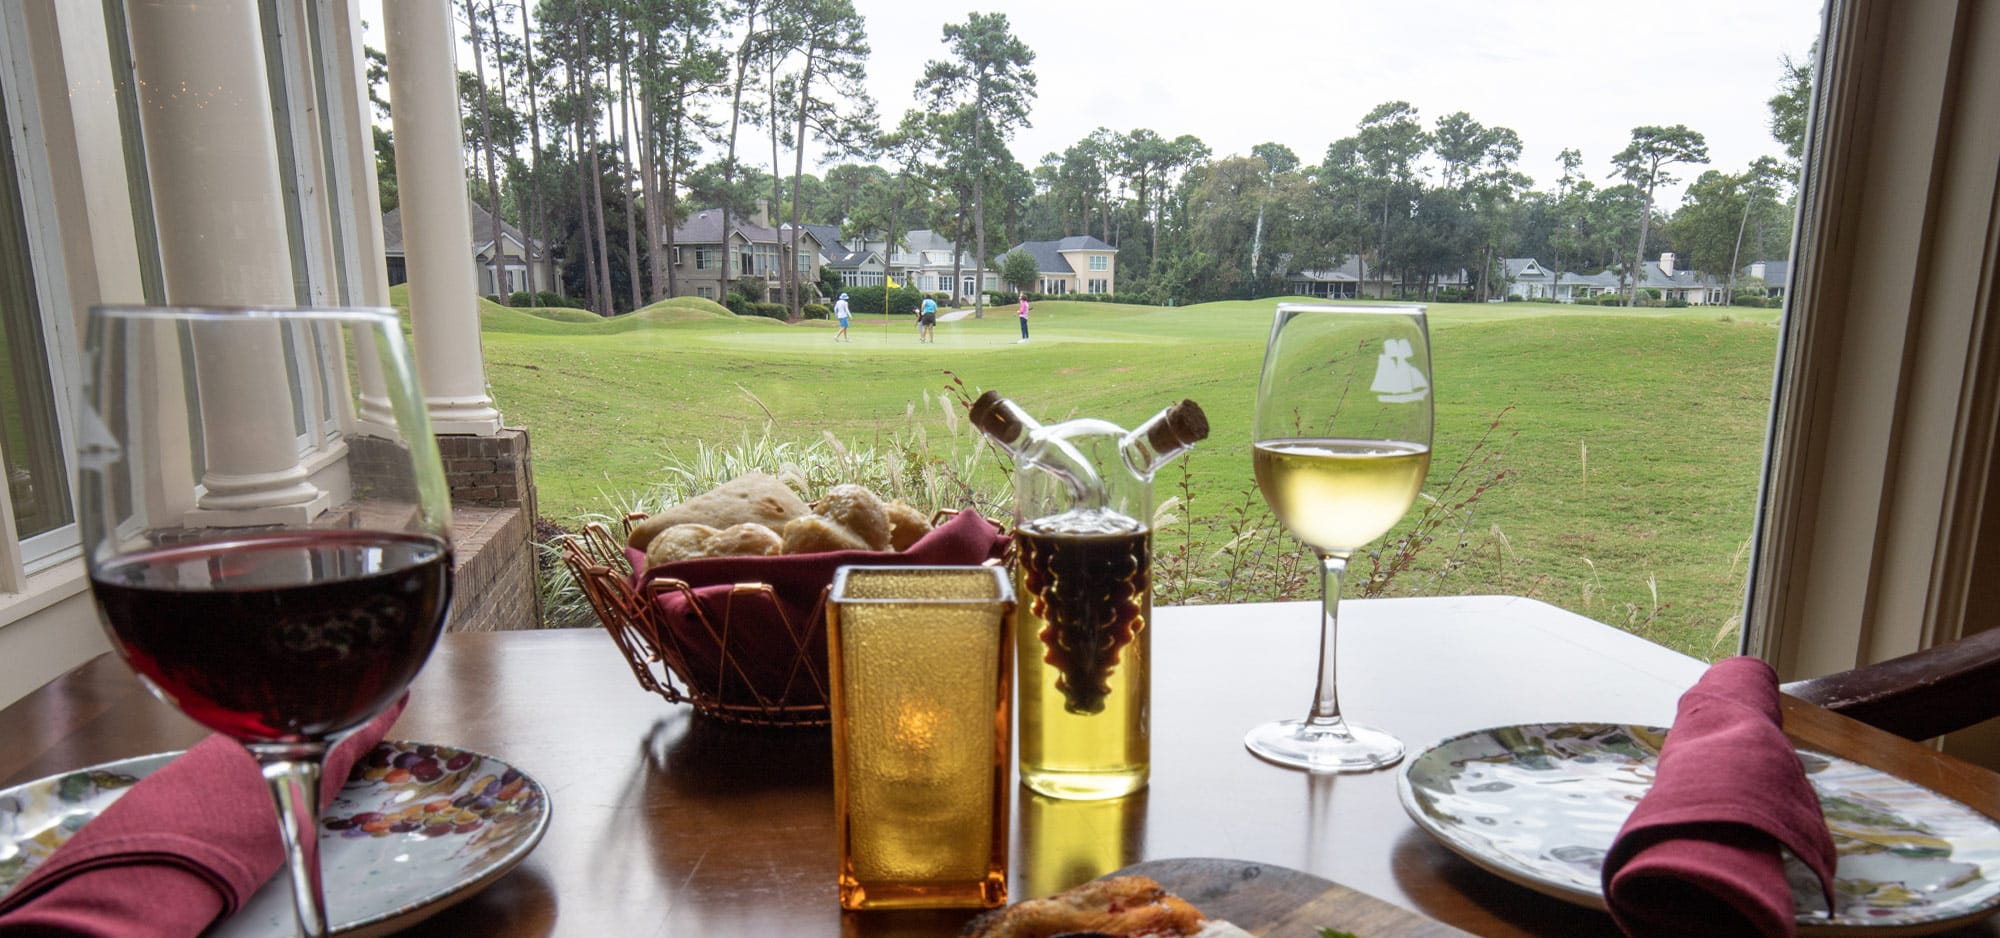 A glass of red wine, basket of bread and a glass of white wine sit on a restaurant table that has a view of golfers playing a round on one of the six championship courses.